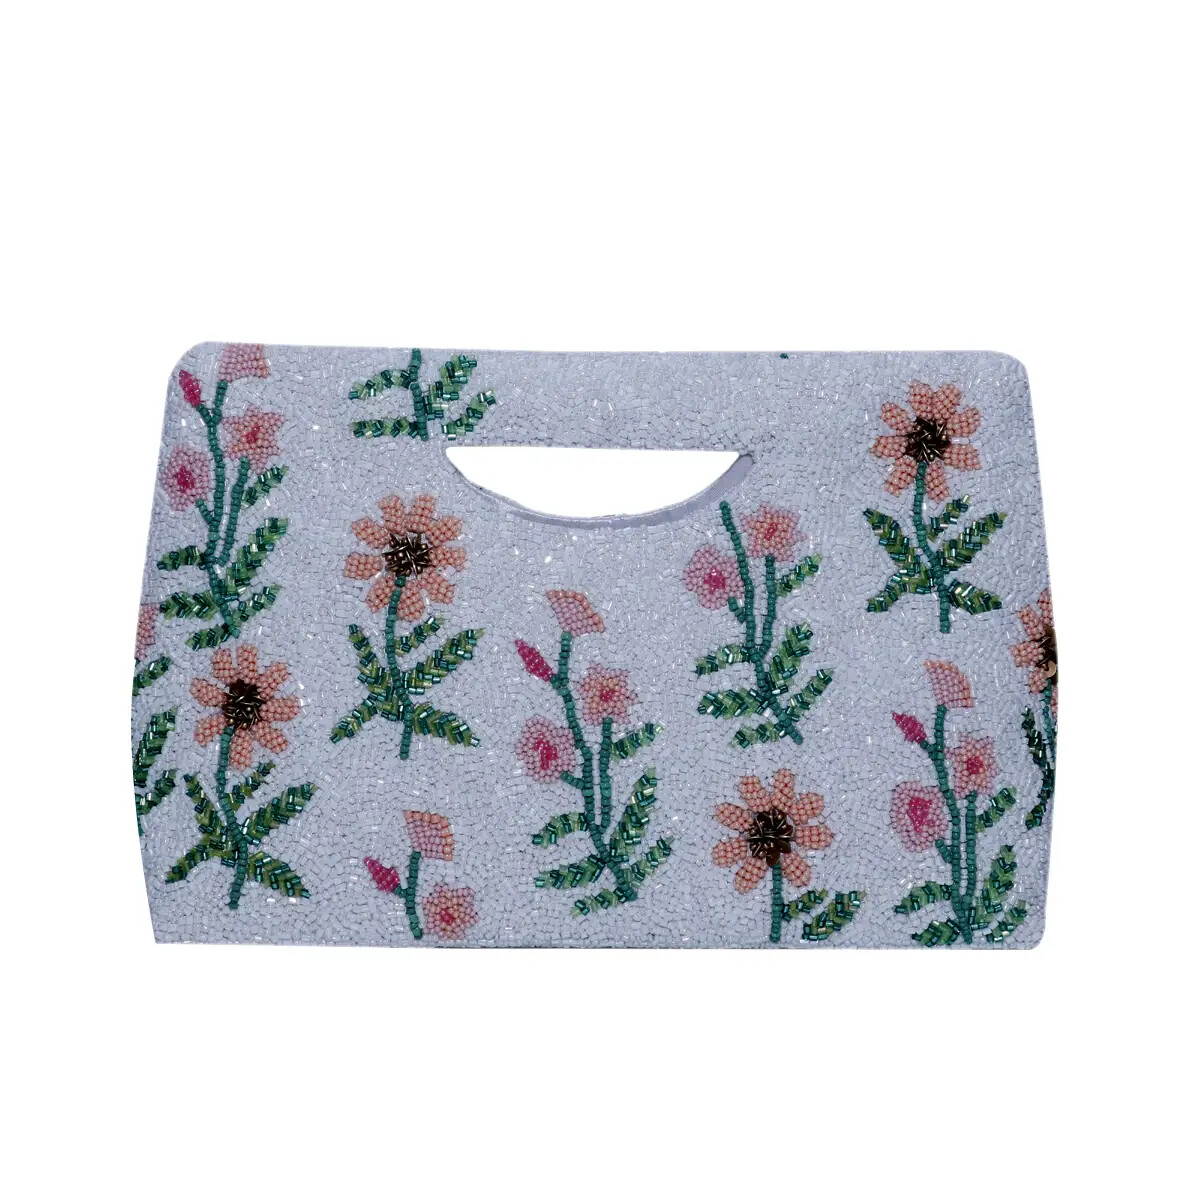 Tiana Pink Floral Clutch